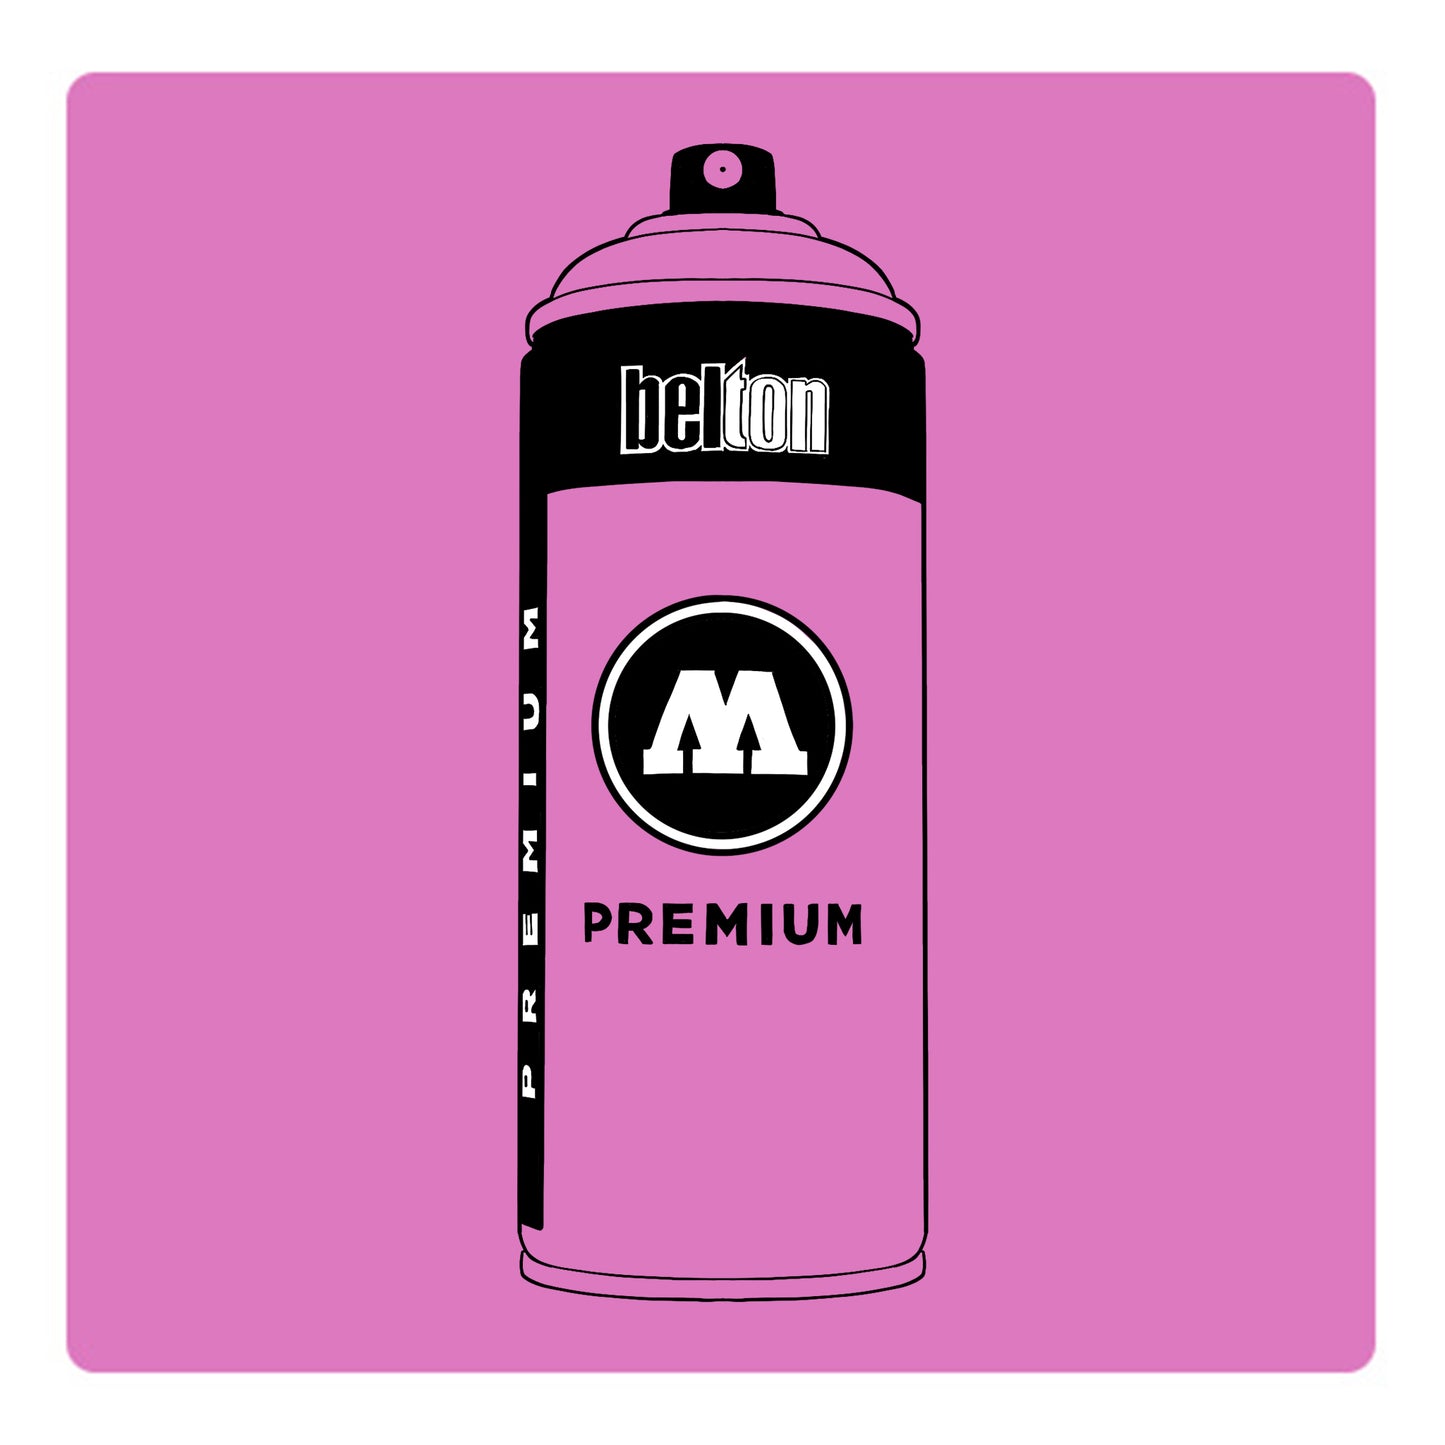 A black outline drawing of a pink spray paint can with the words "belton","premium" and the letter"M" written on the face in black and white font. The background is a color swatch of the same pink with a white border.